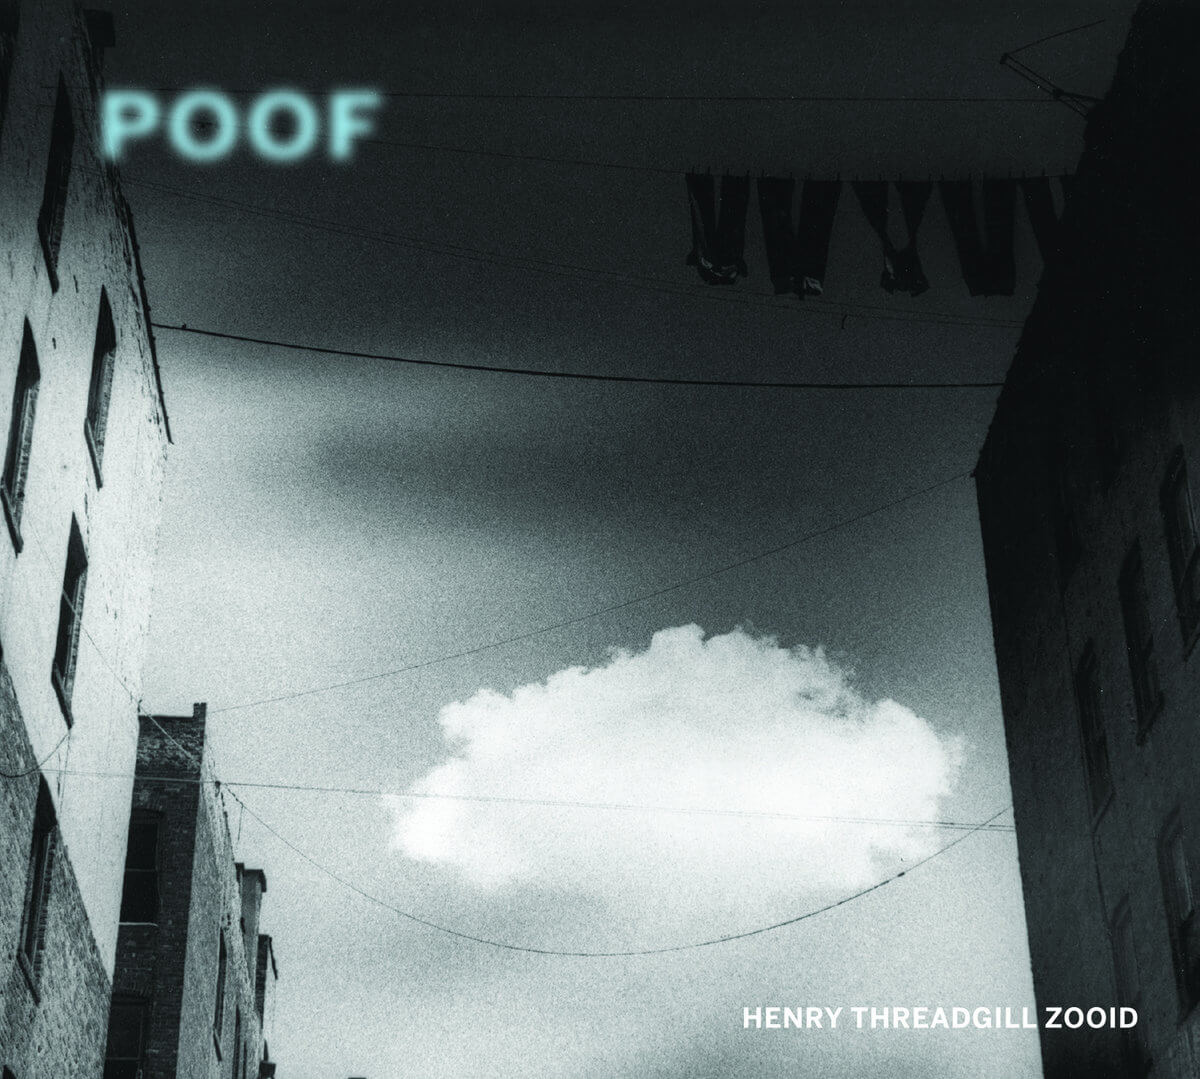 henry-threadgill-zooid_poof-cover